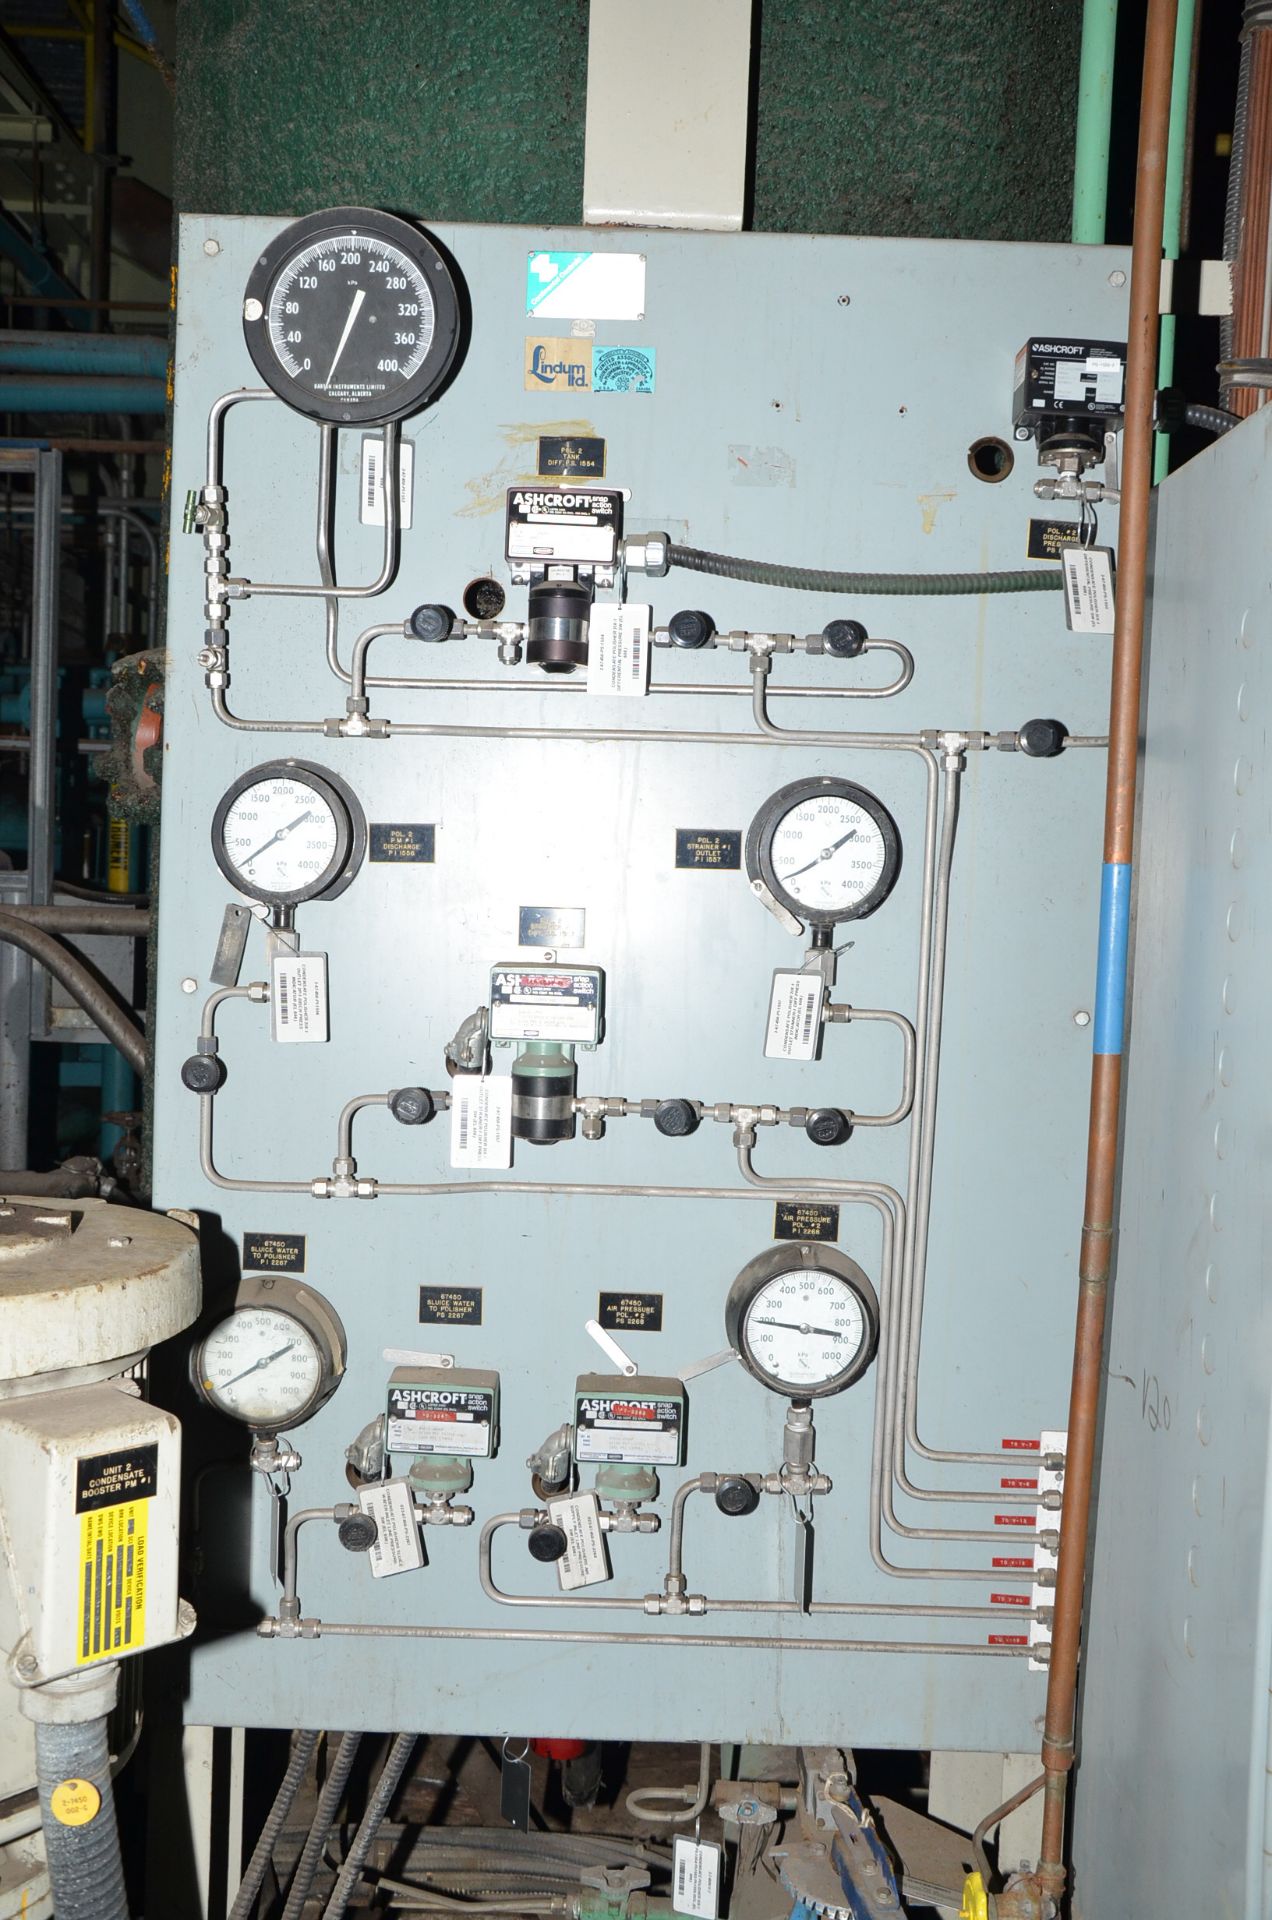 GRAVER SKID MOUNTED CONDENSATE POLISHING SYSTEM WITH TANKS, VALVES, PUMPS, INSTRUMENTS AND CONTROL - Image 9 of 10